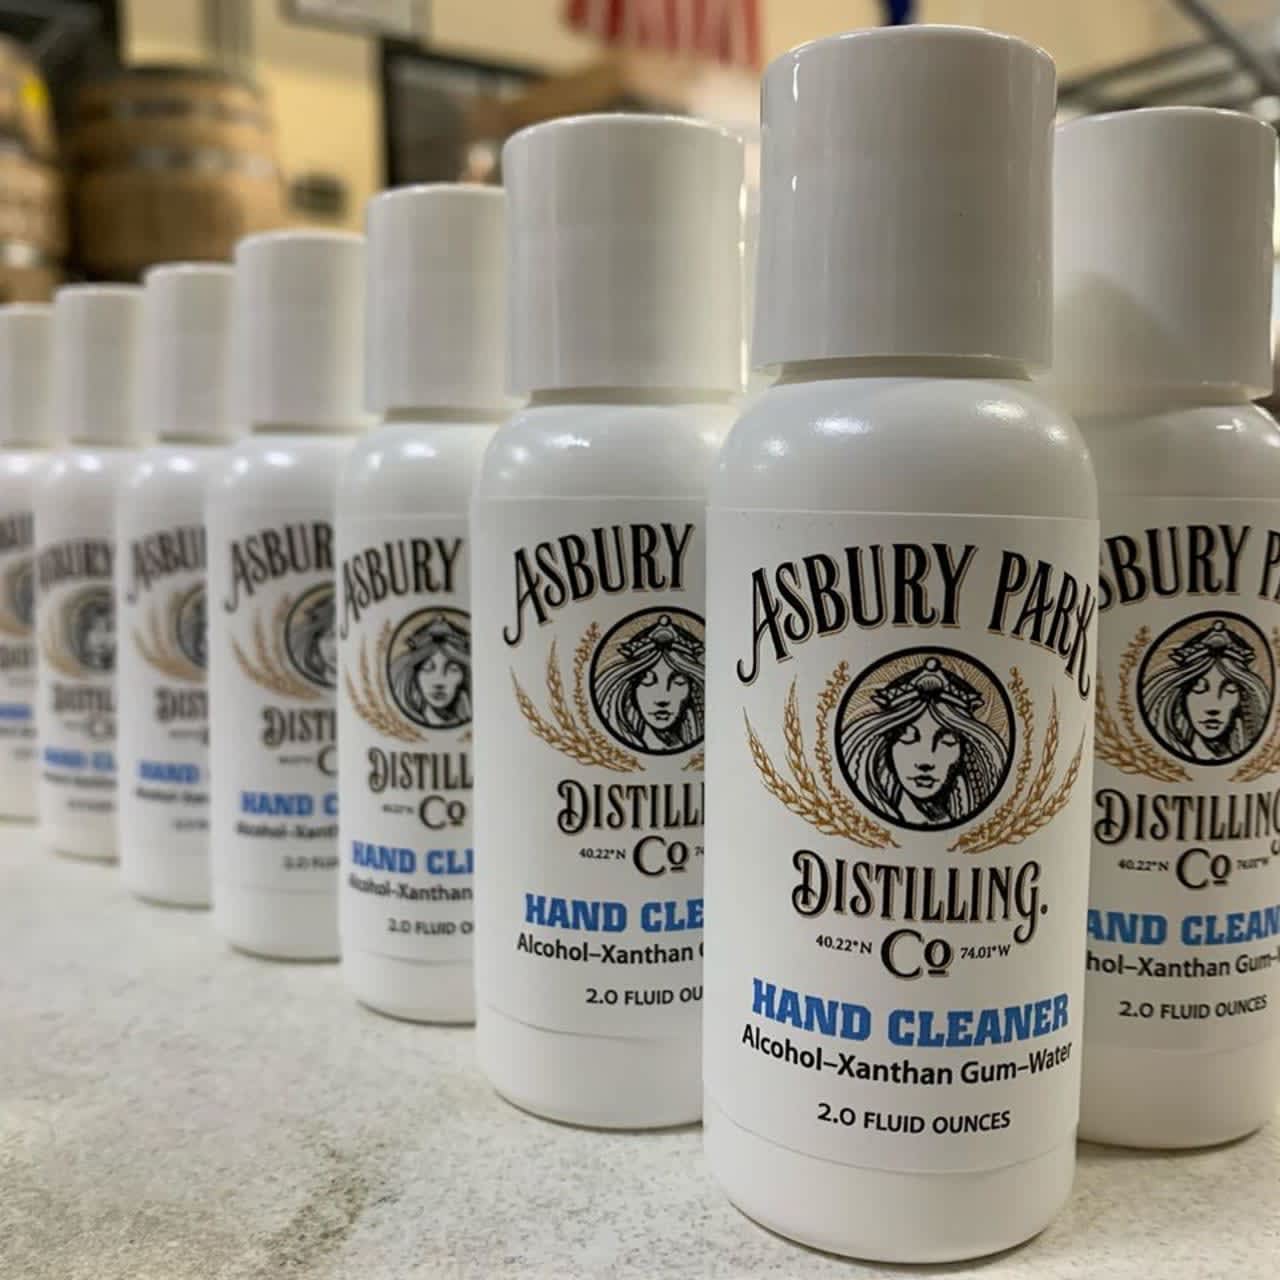 Asbury Park Distilling Co. has halted spirit production in favor of creating hand sanitizer.